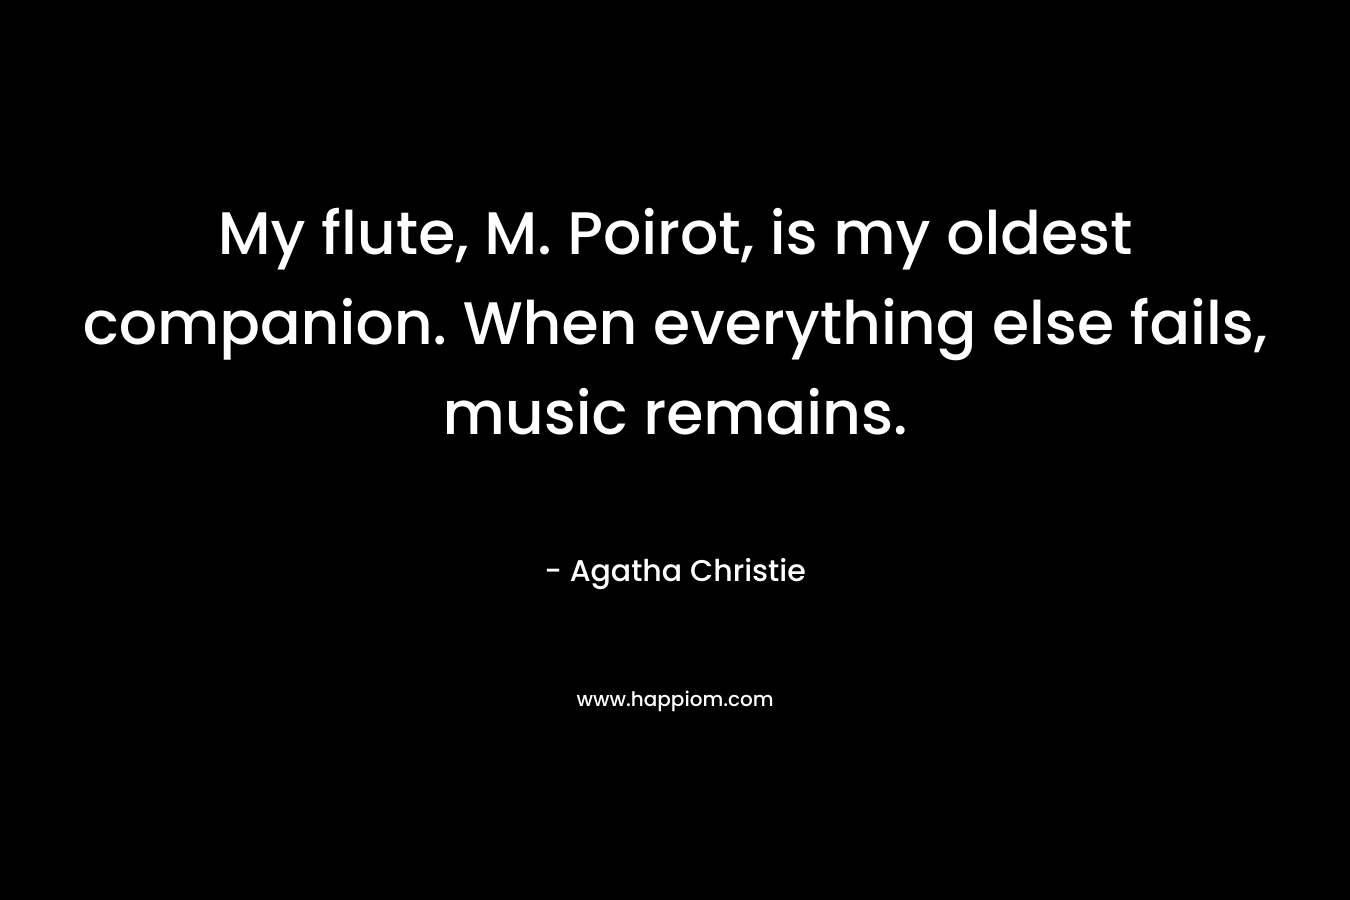 My flute, M. Poirot, is my oldest companion. When everything else fails, music remains. – Agatha Christie